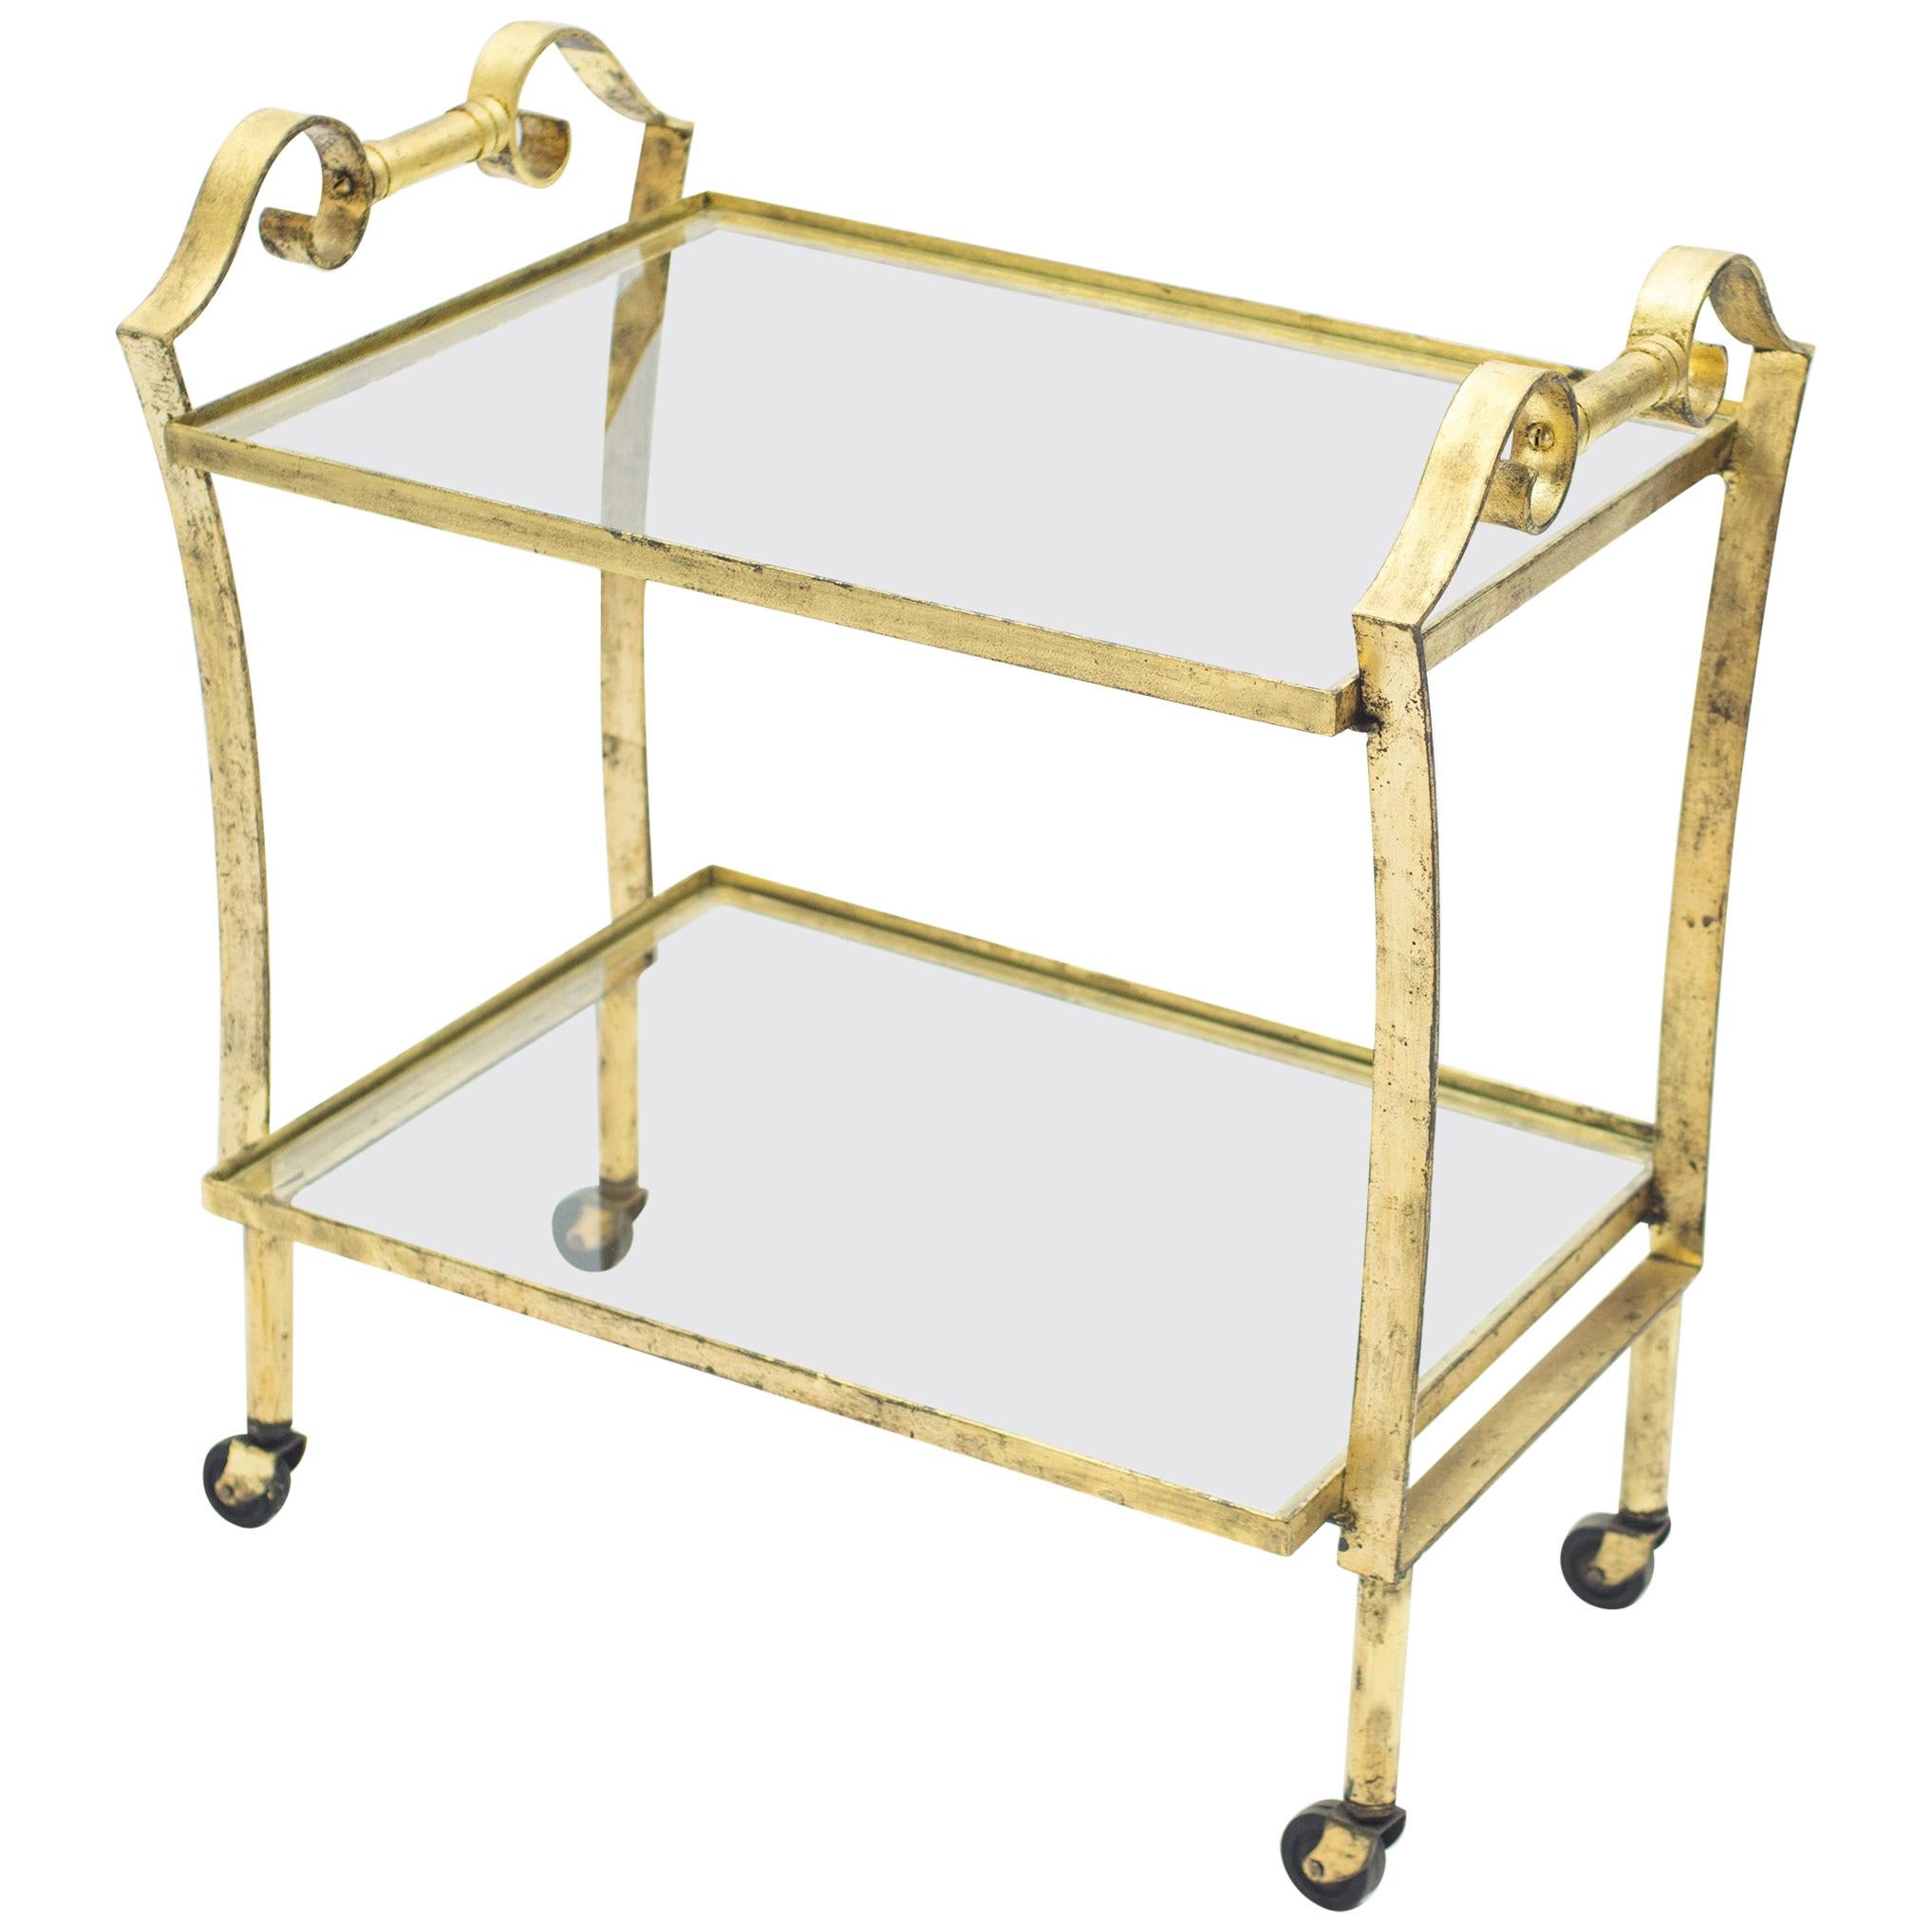 This chic bar cart from the 1940s carries with it the elegant mood of the neoclassical post Art Deco period. Glittering in an antiqued gold gilt finish, this iron craft bar cart adds a glam twist which makes a gracious compliment to both traditional